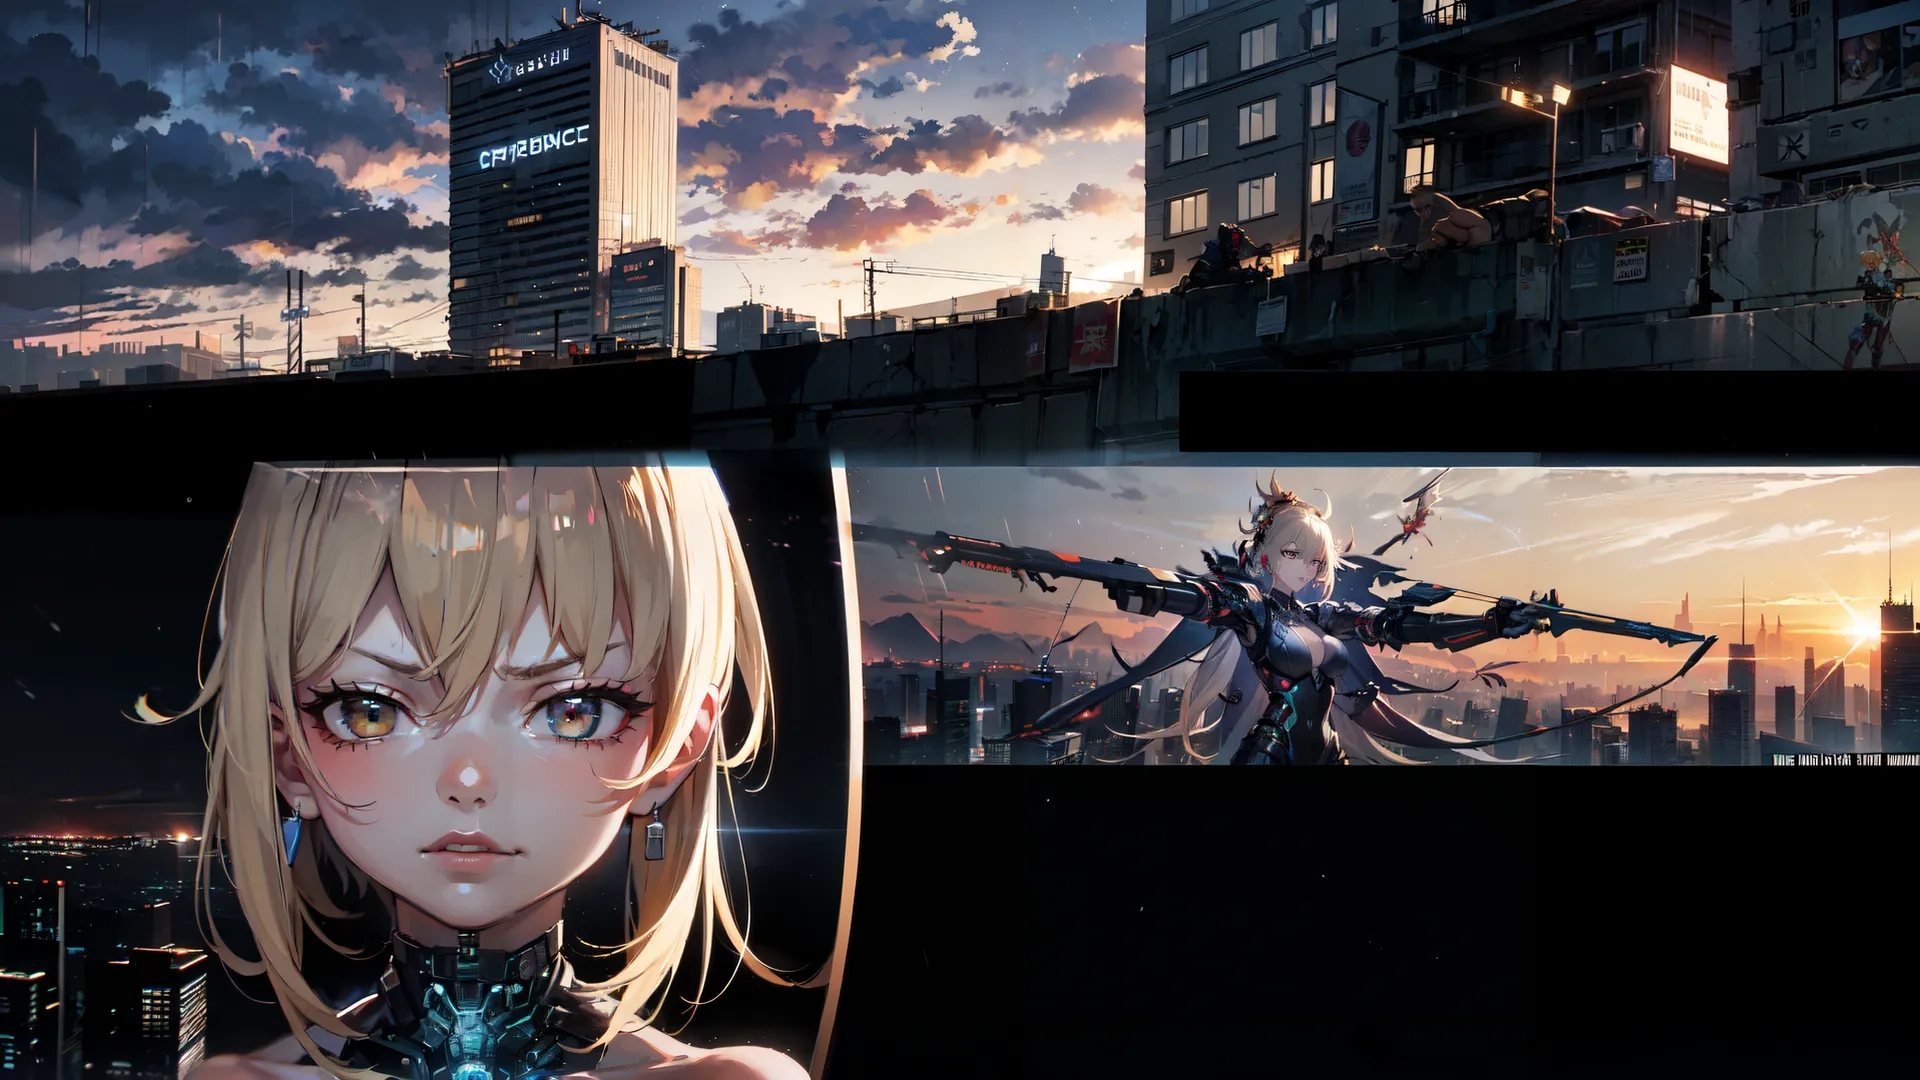 an anime girl holding some kind of object standing outside at night in front of cityscape and skyscrapers along with her camera, overlooking over the horizon
